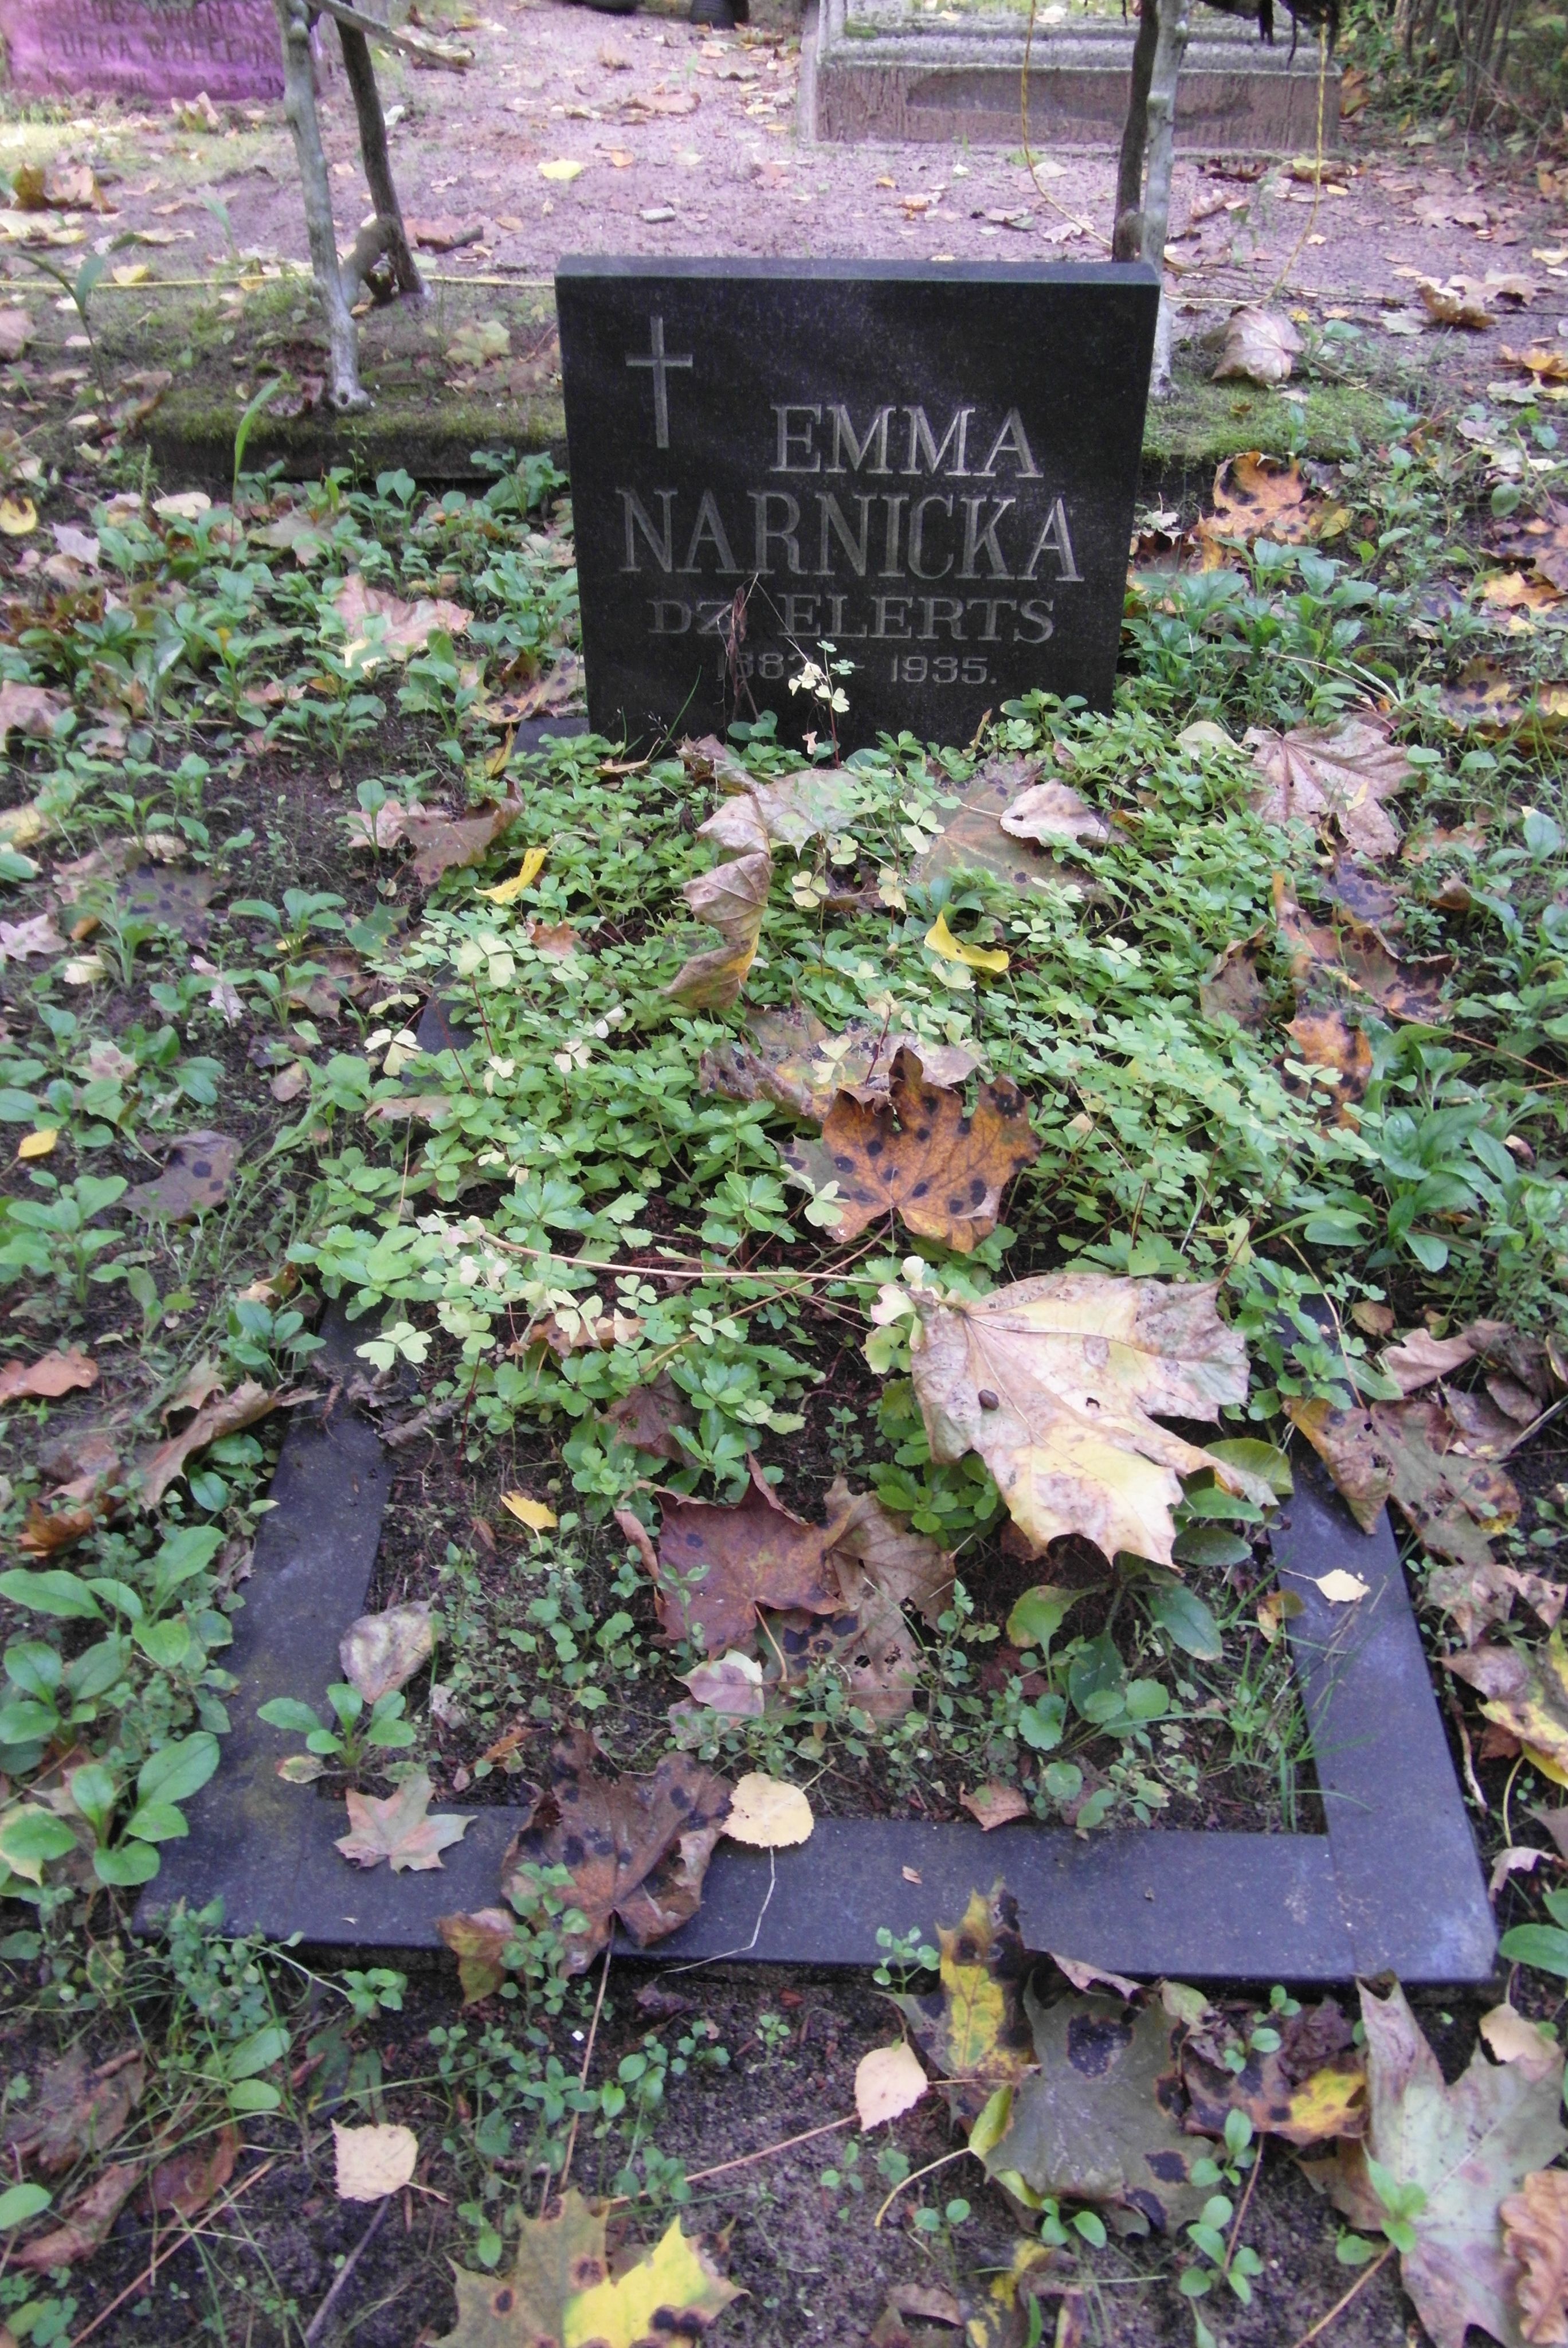 Tombstone of Emma Narnicka, St Michael's cemetery in Riga, as of 2021.